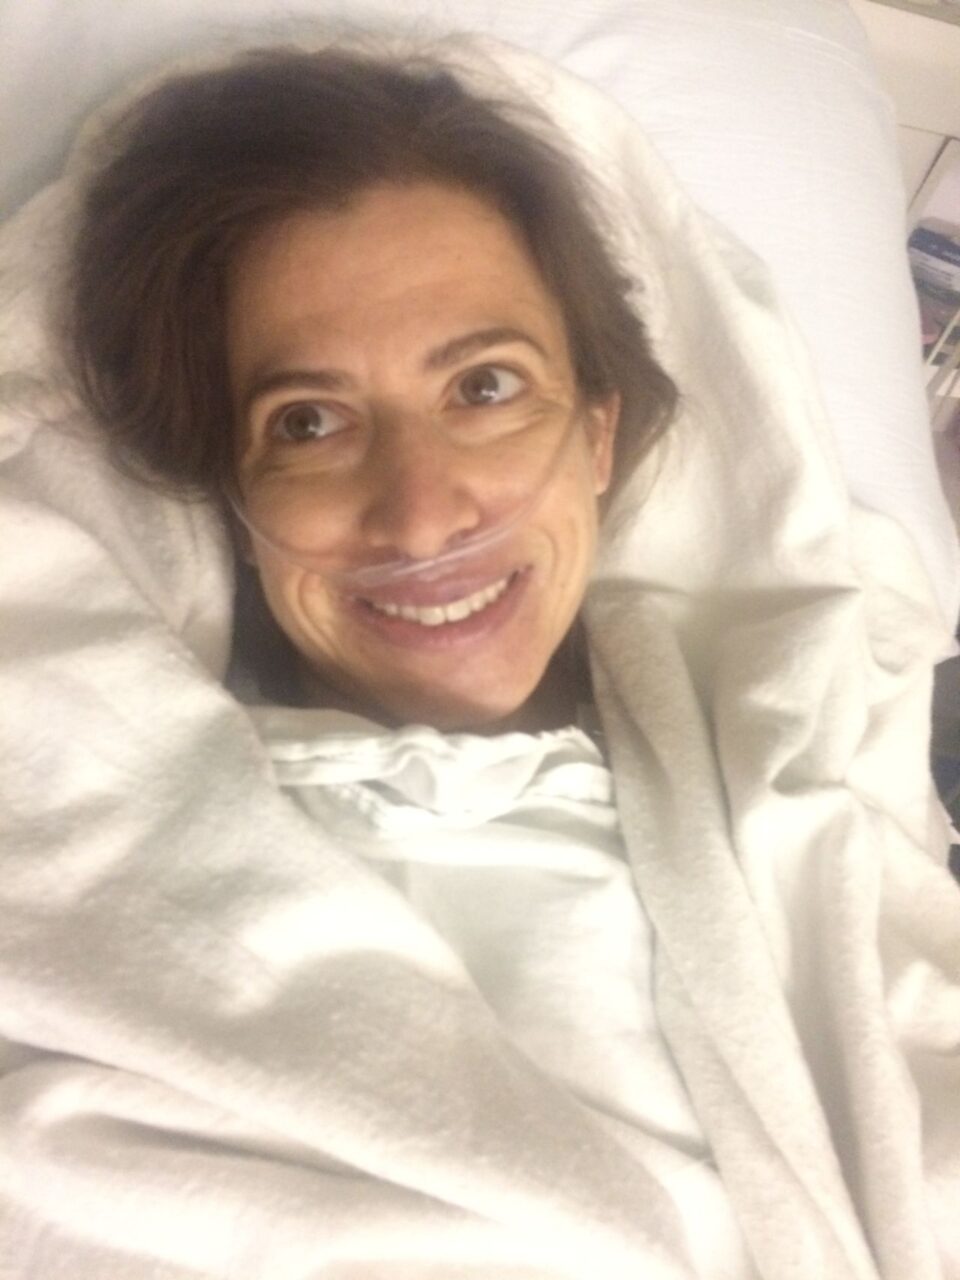 Sally Wolf: A genuinely grateful glowing Sally smile shortly after waking up from the deep sleep I enjoyed while an incredible surgical dream team worked their magic